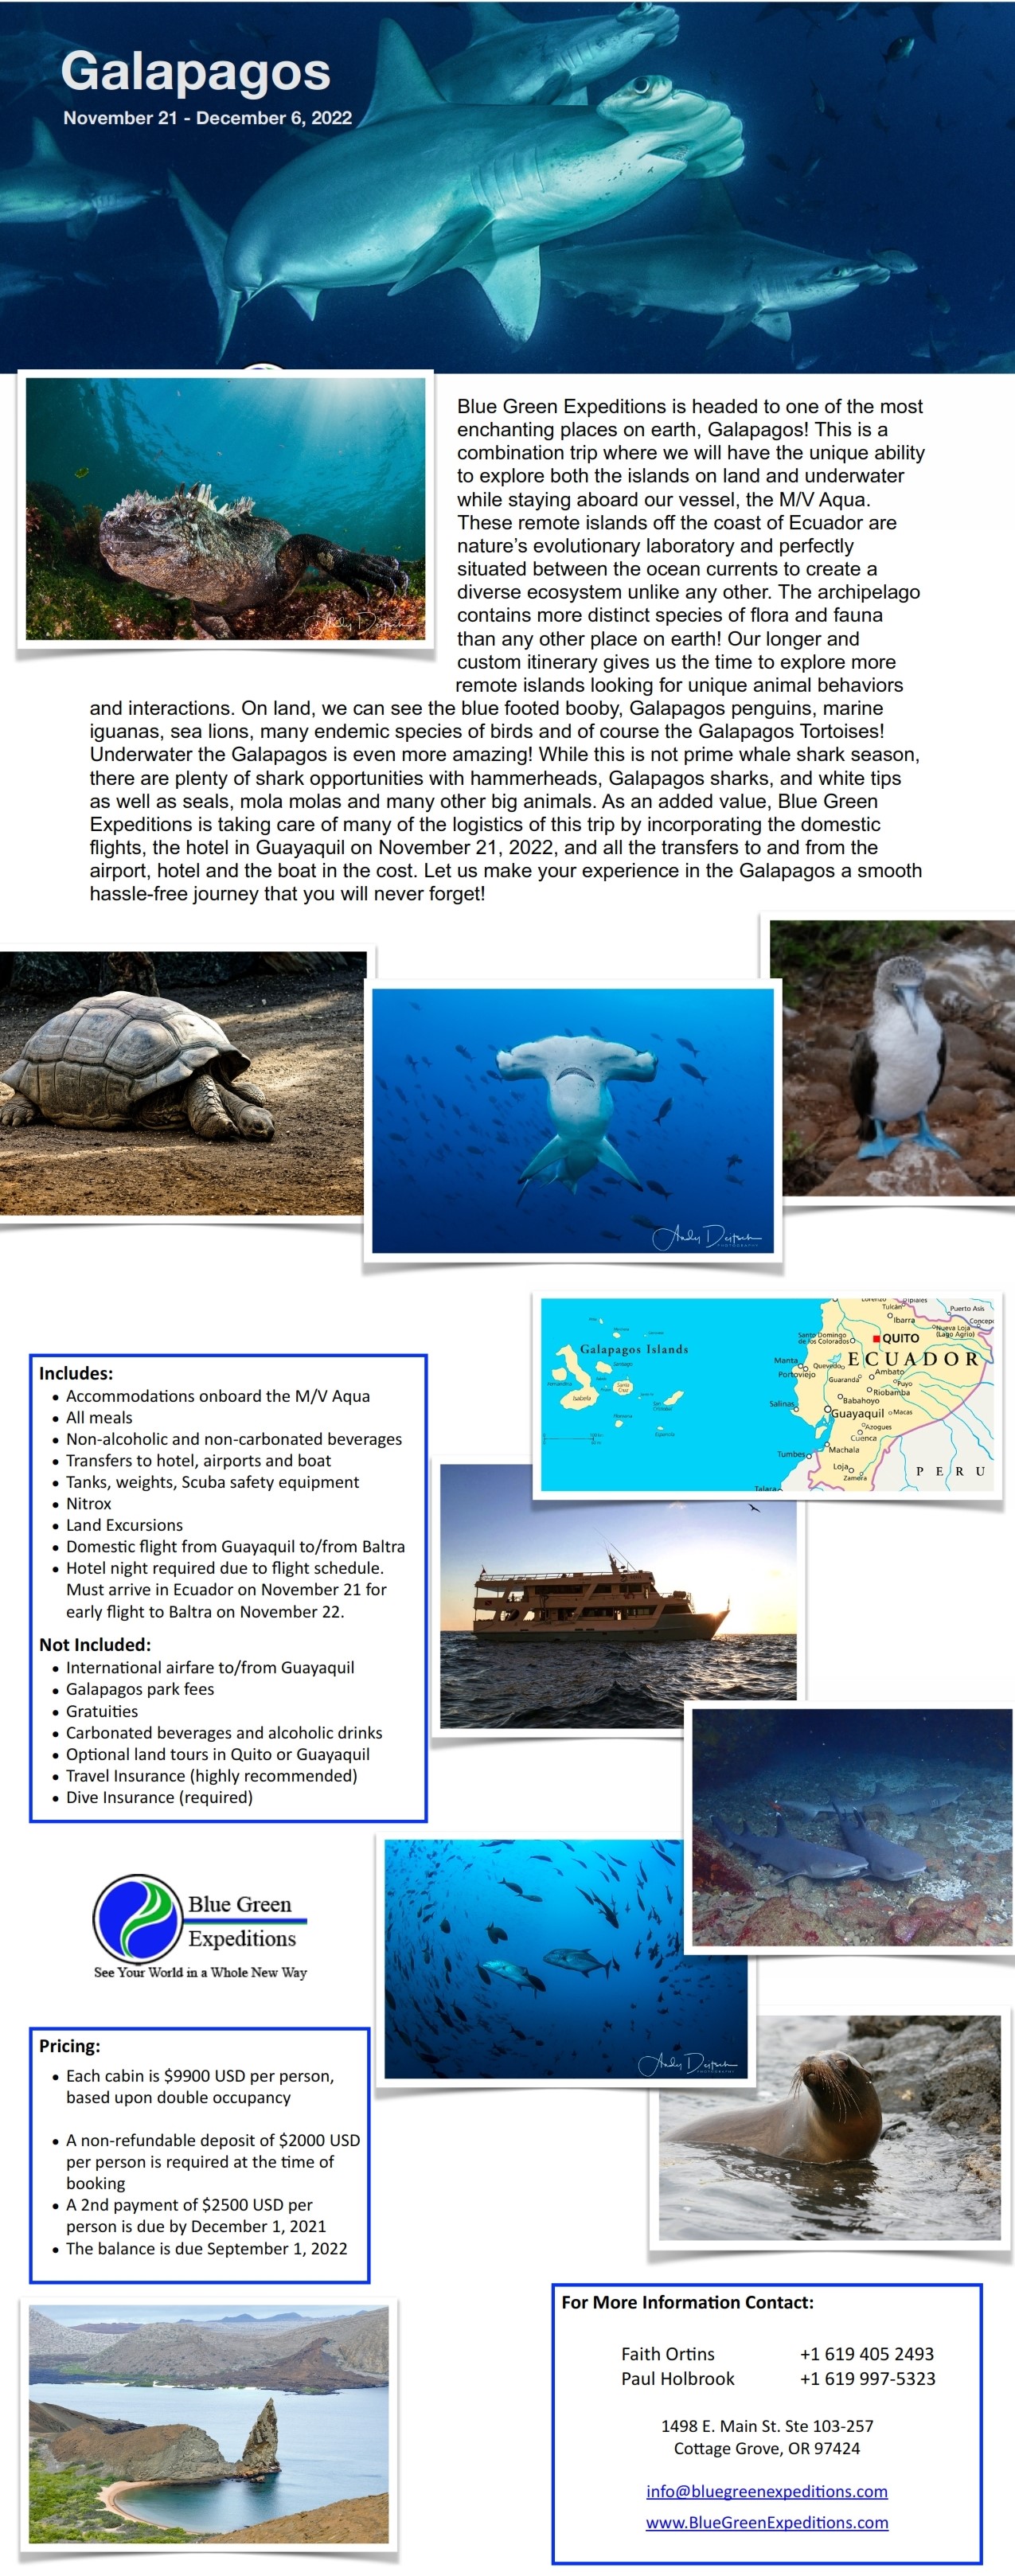 Galapagos Expedition, November 21 - December 6, 2022, cost and trip details. PDF flyer contains the same information.